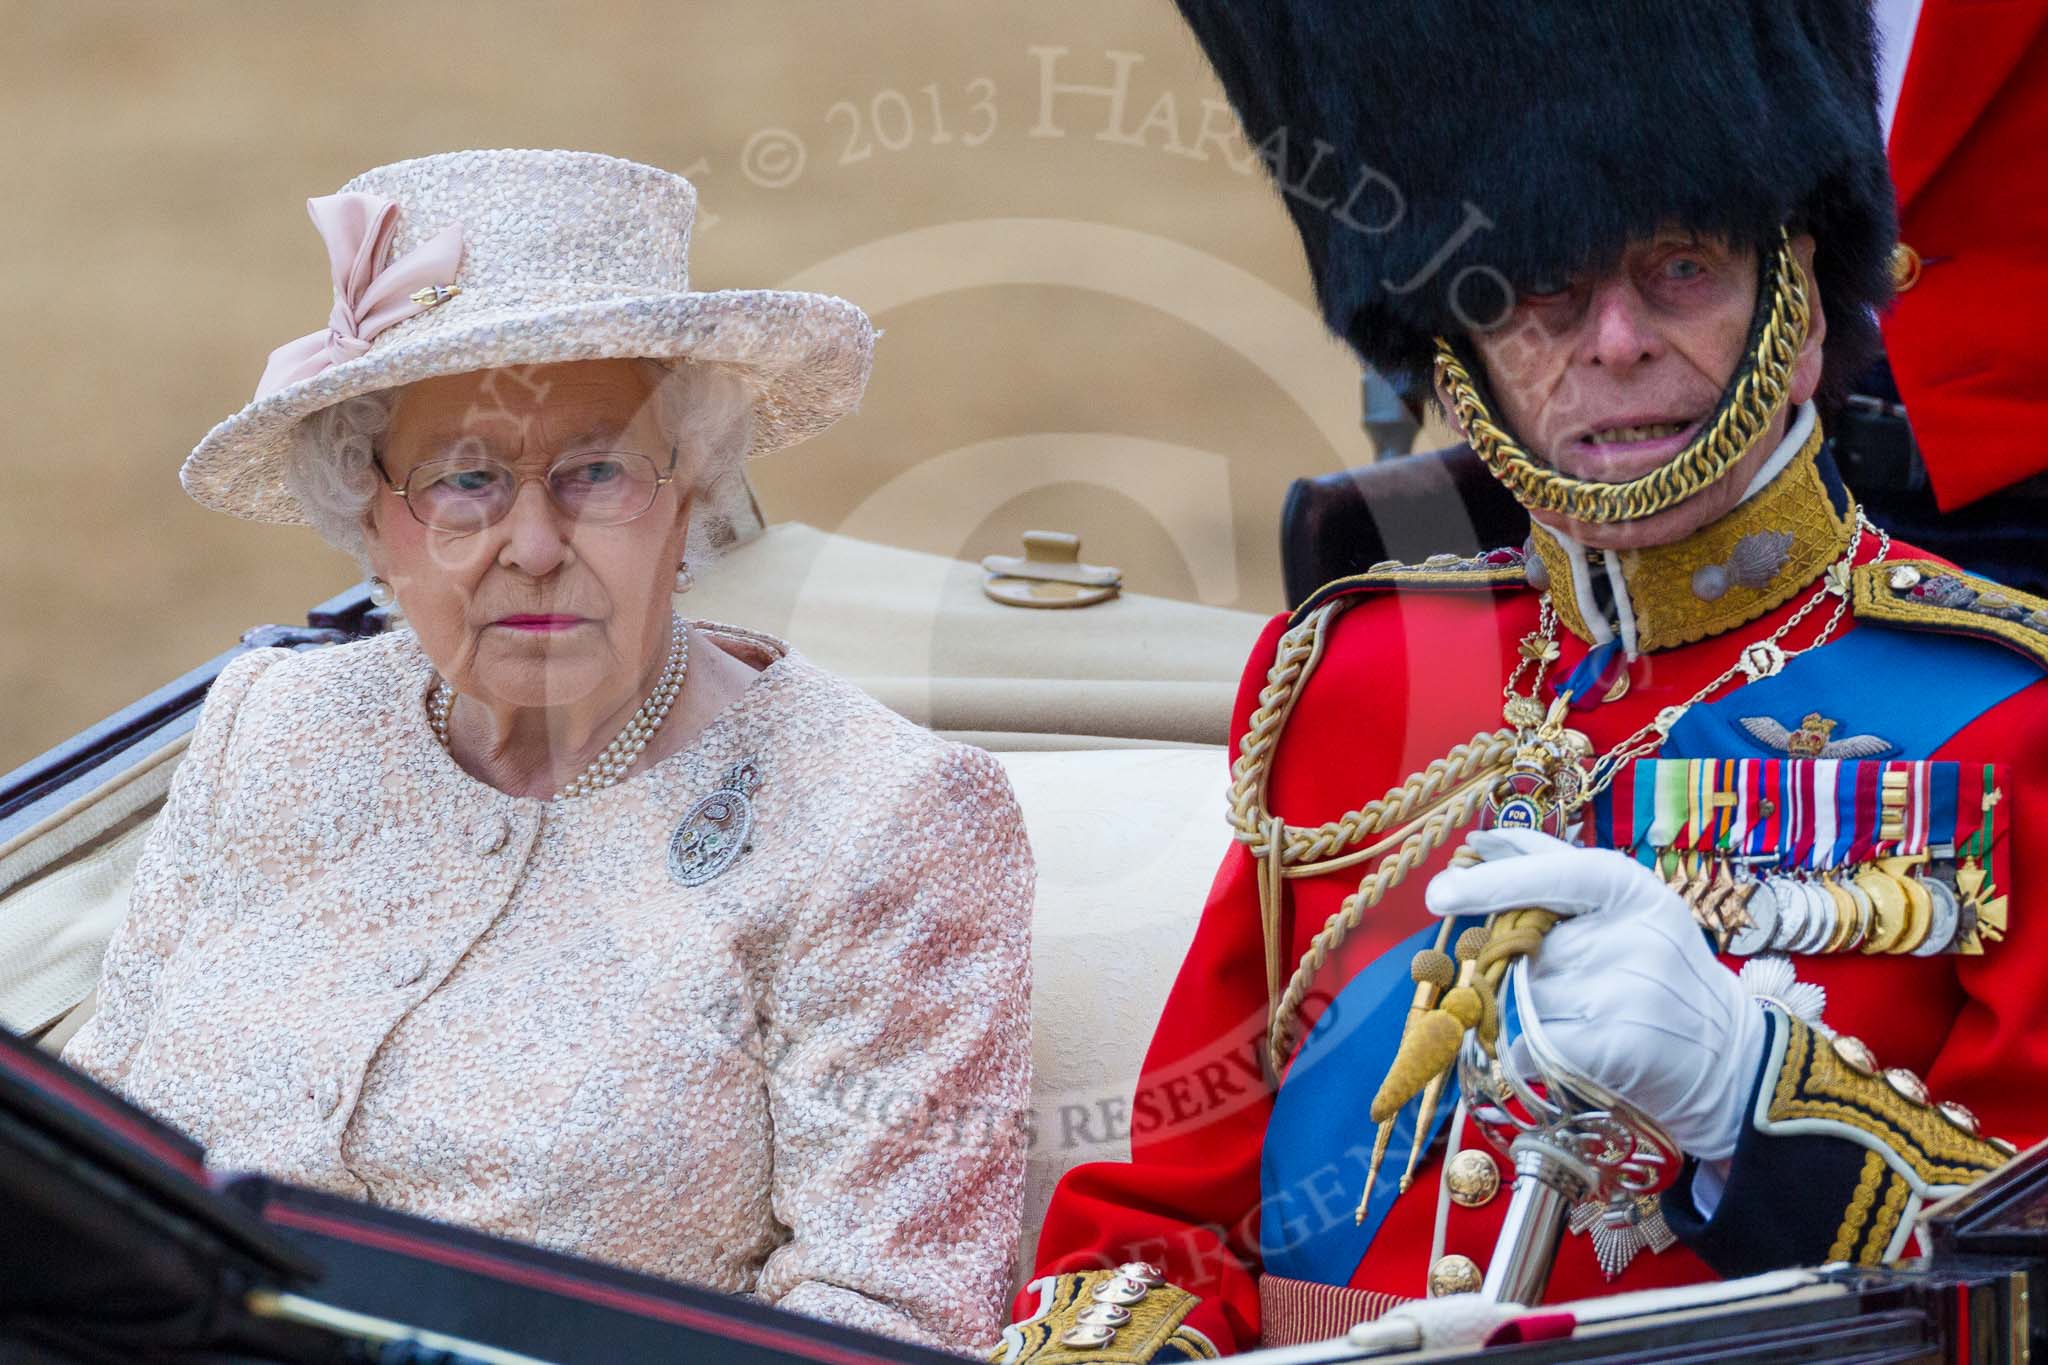 Trooping the Colour 2015. Image #655, 13 June 2015 12:09 Horse Guards Parade, London, UK